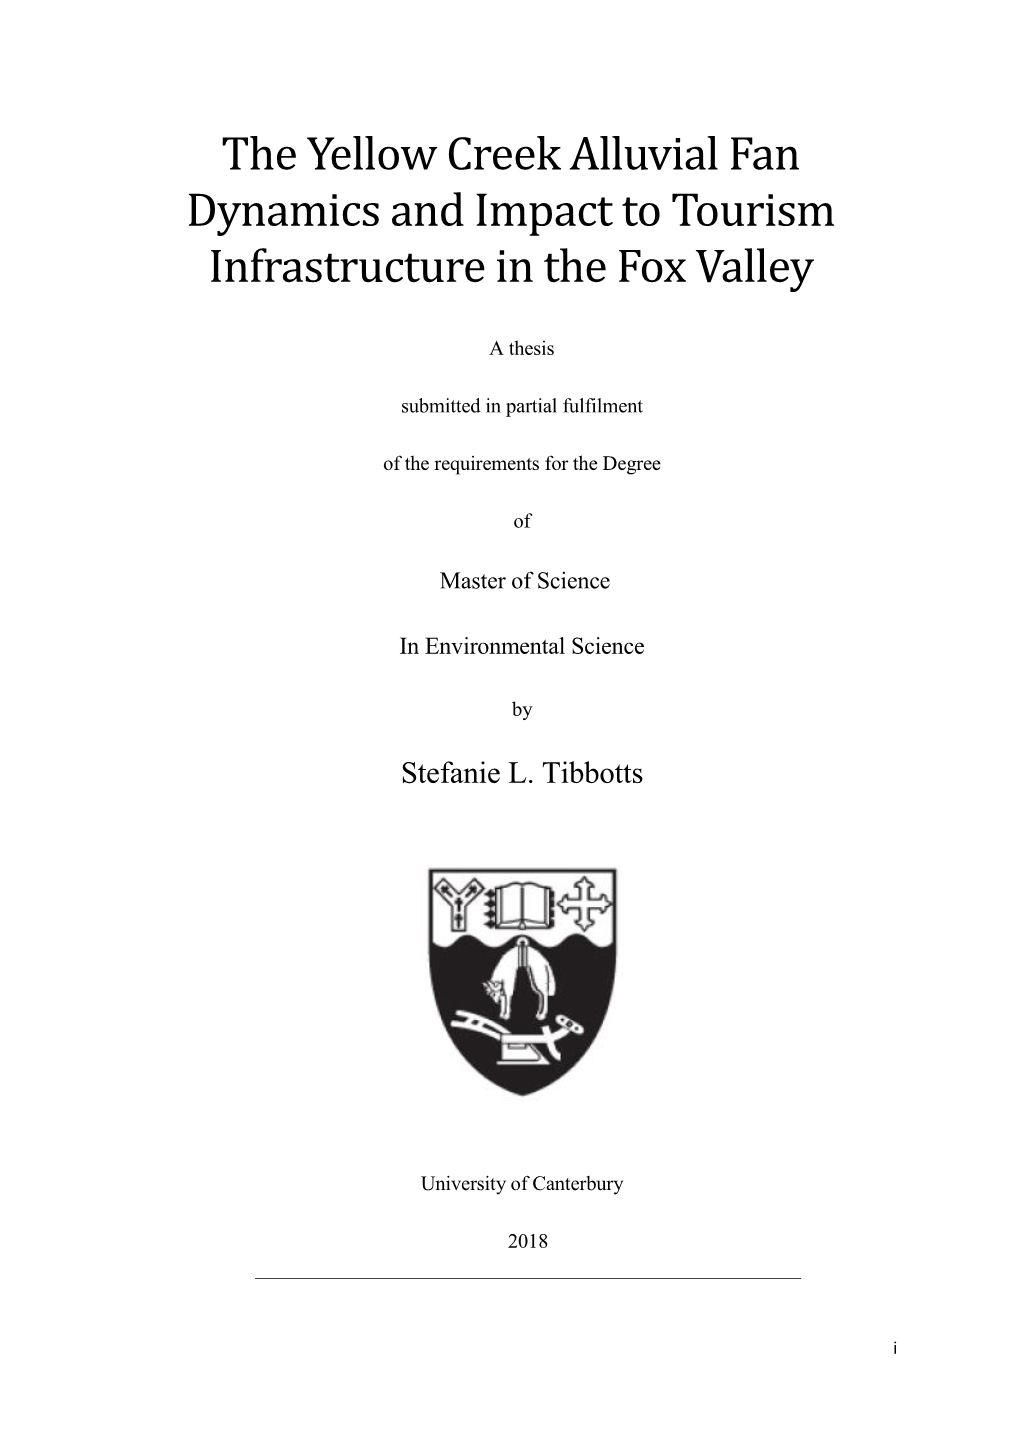 The Yellow Creek Alluvial Fan Dynamics and Impact to Tourism Infrastructure in the Fox Valley